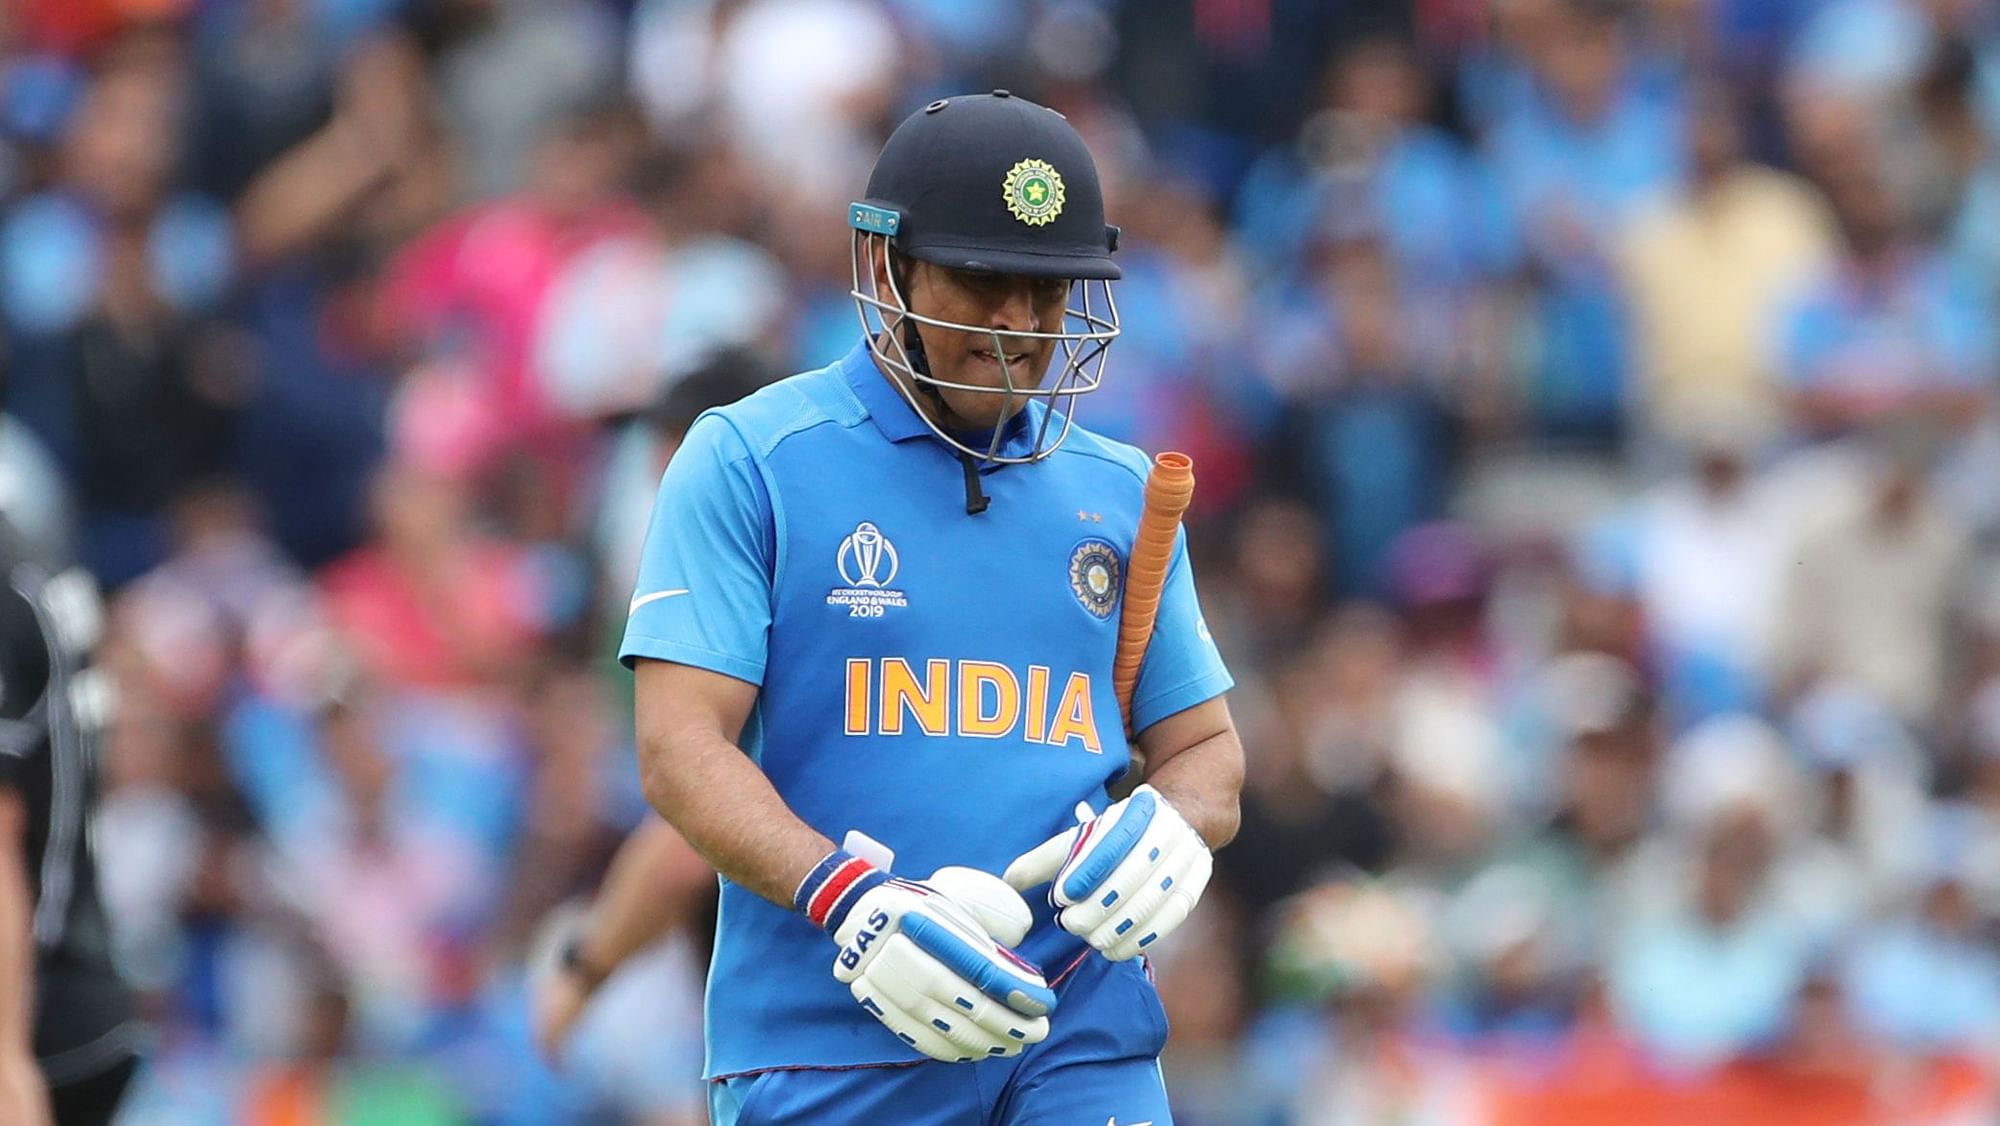 MS Dhoni was sent into bat at number 7 despite India losing early wickets.